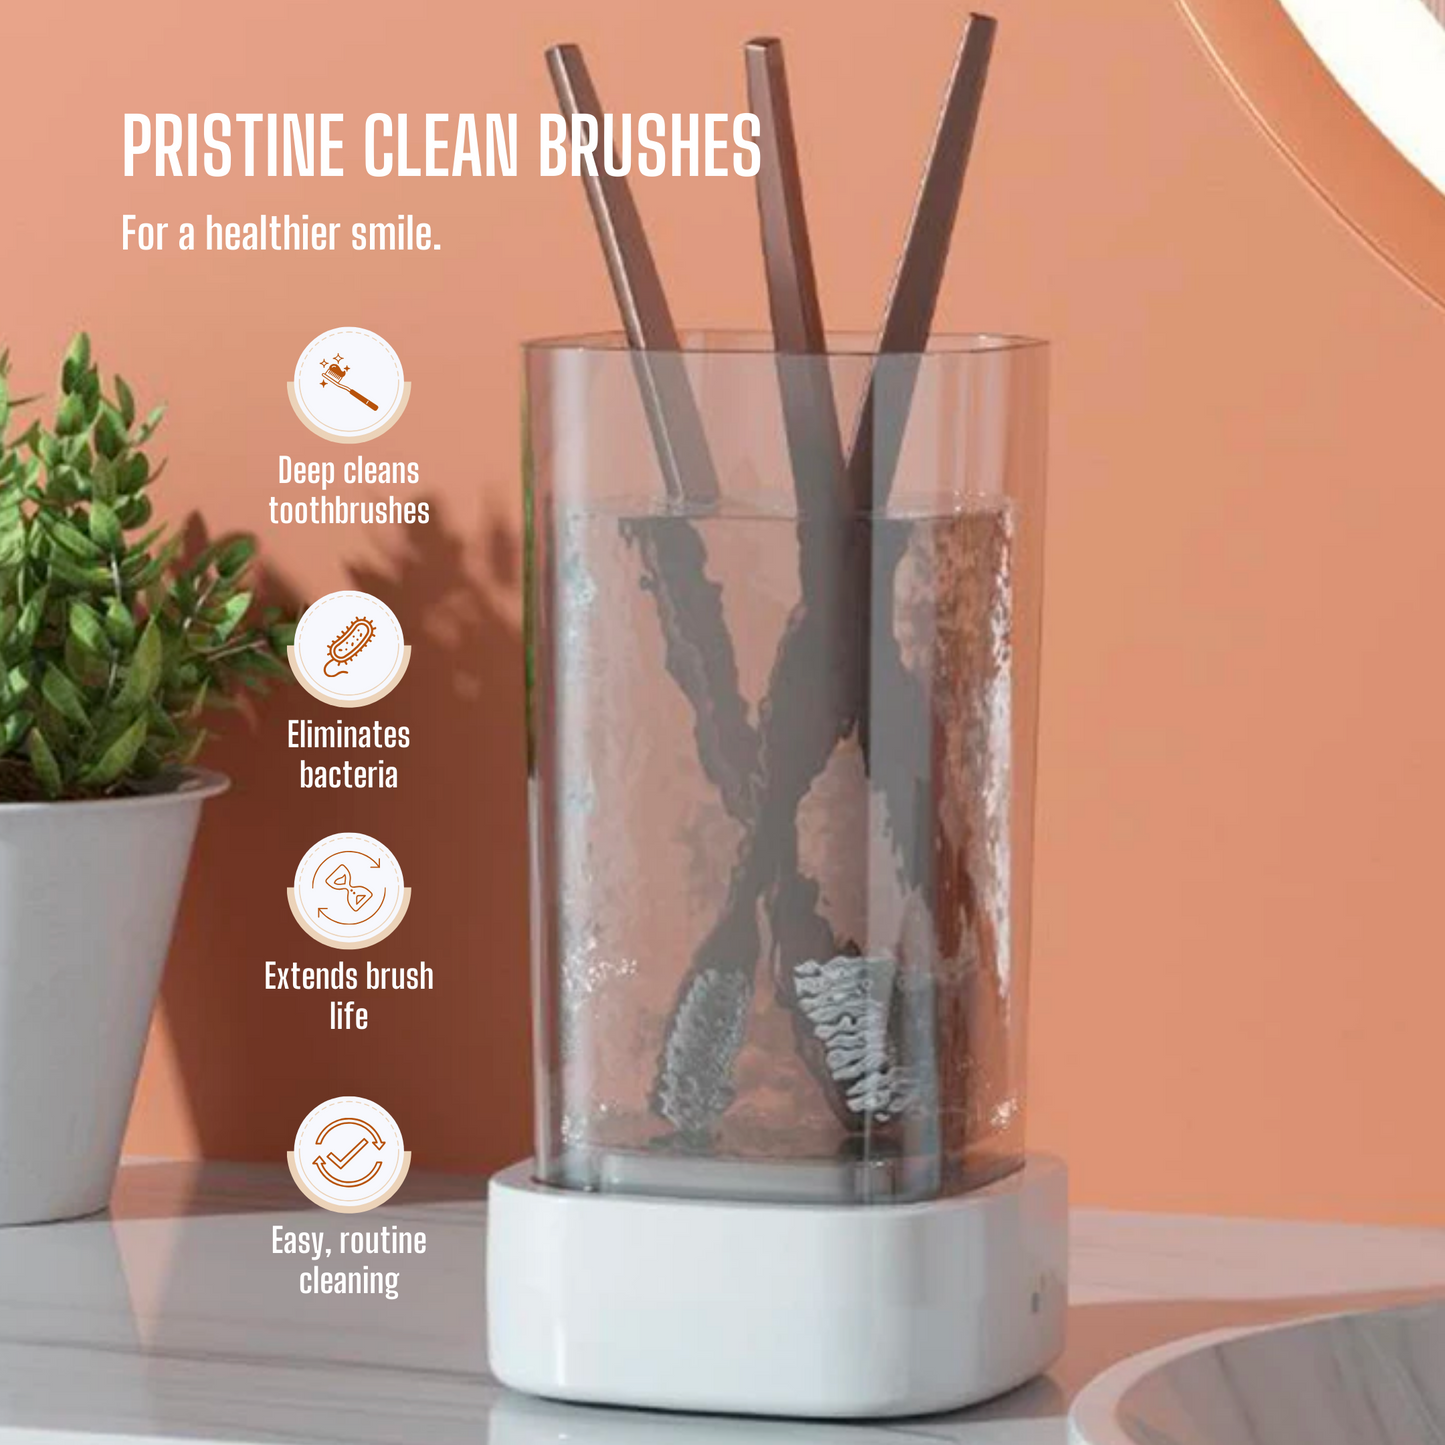 Powerful Ultrasonic Rechargeable Cleaner: Eco-Friendly & Compact Design with Quick Dry function for Jewelry, Glasses, Makeup Brushes, and Delicate Items